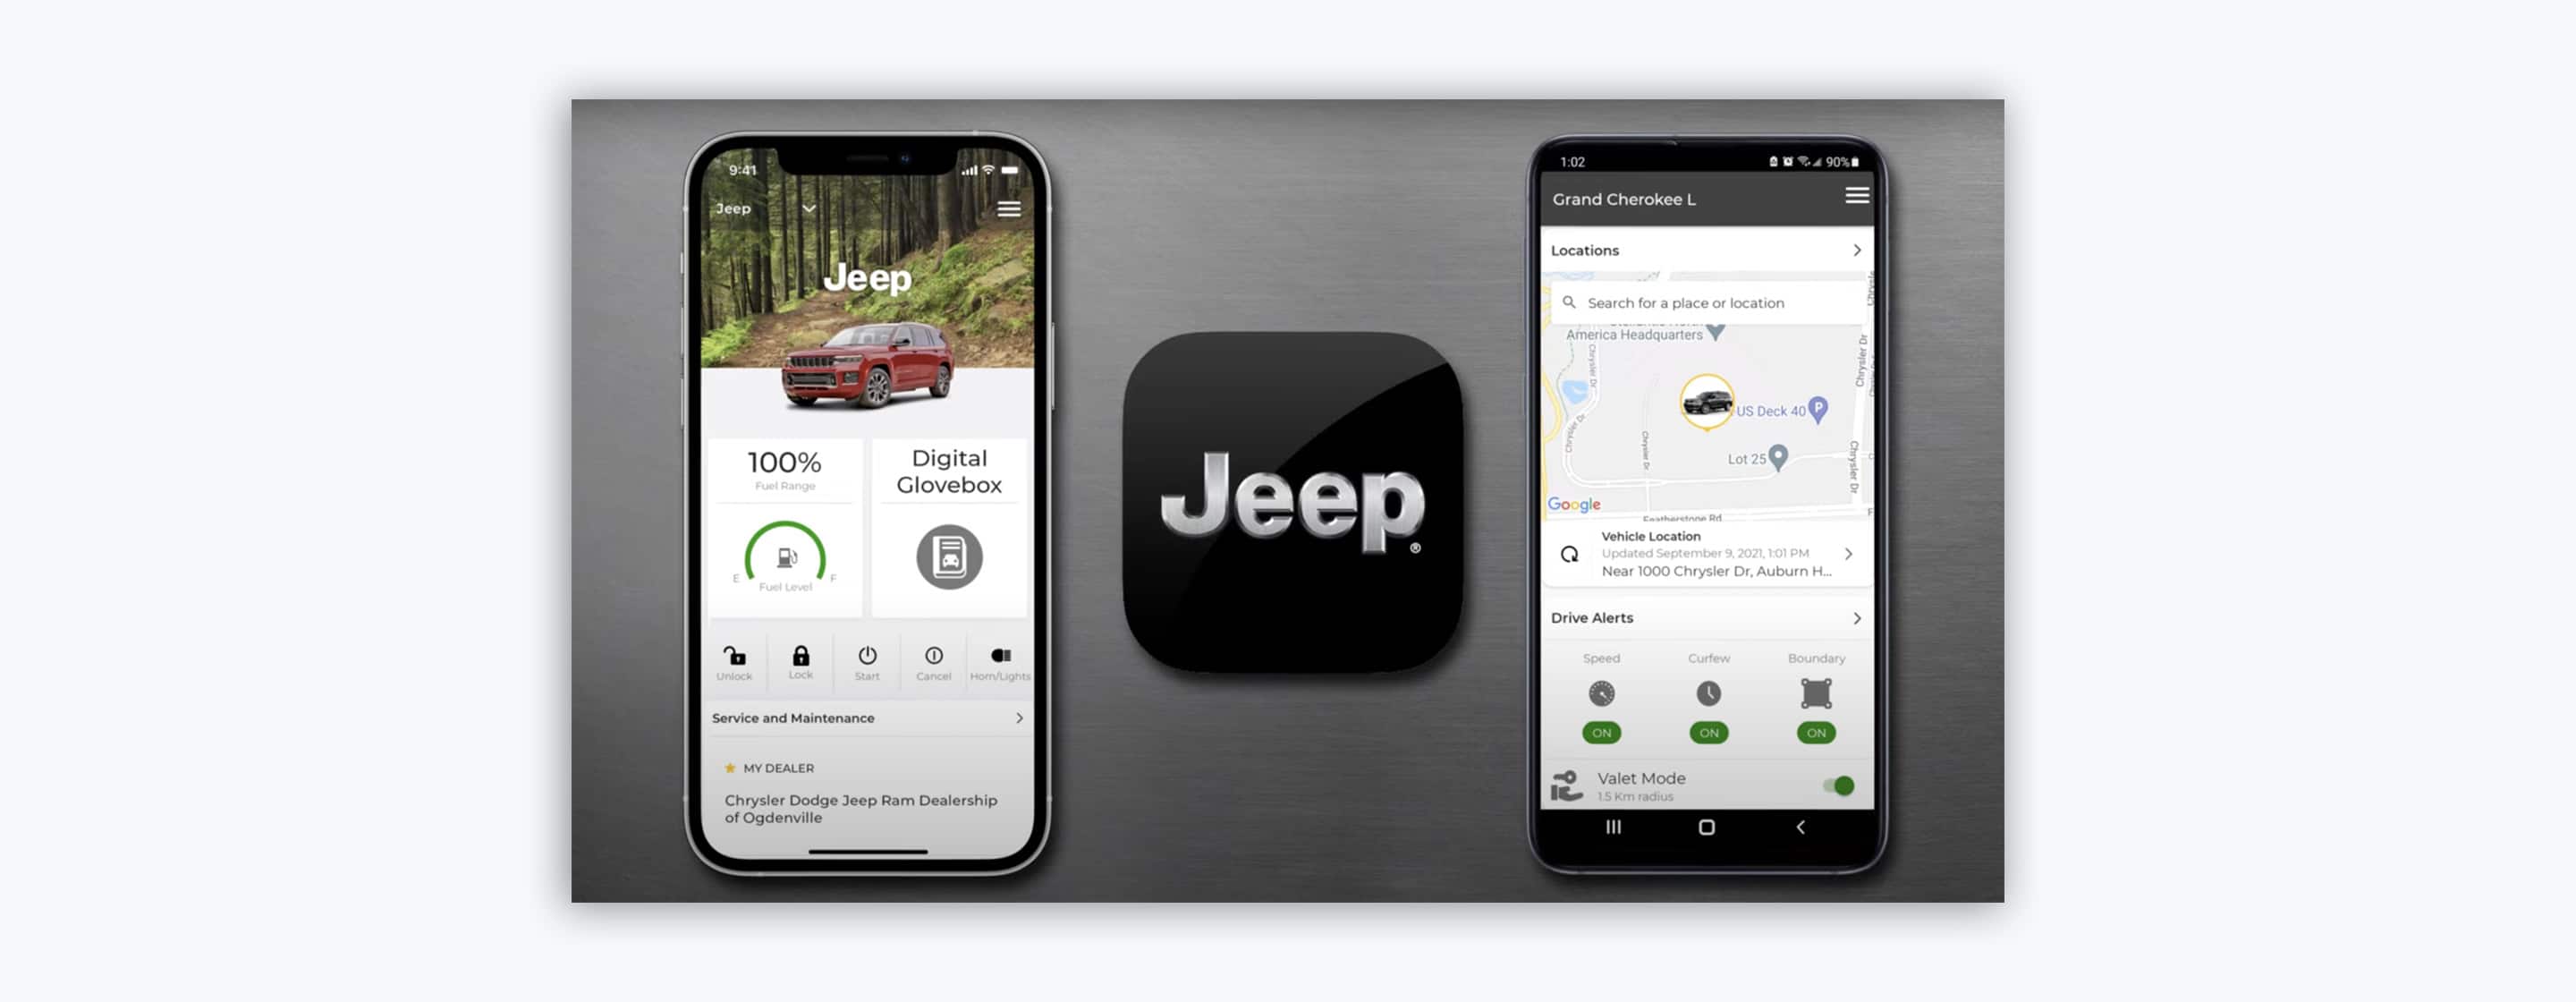 Introduce 54+ images how to connect to jeep uconnect - In.thptnganamst ...